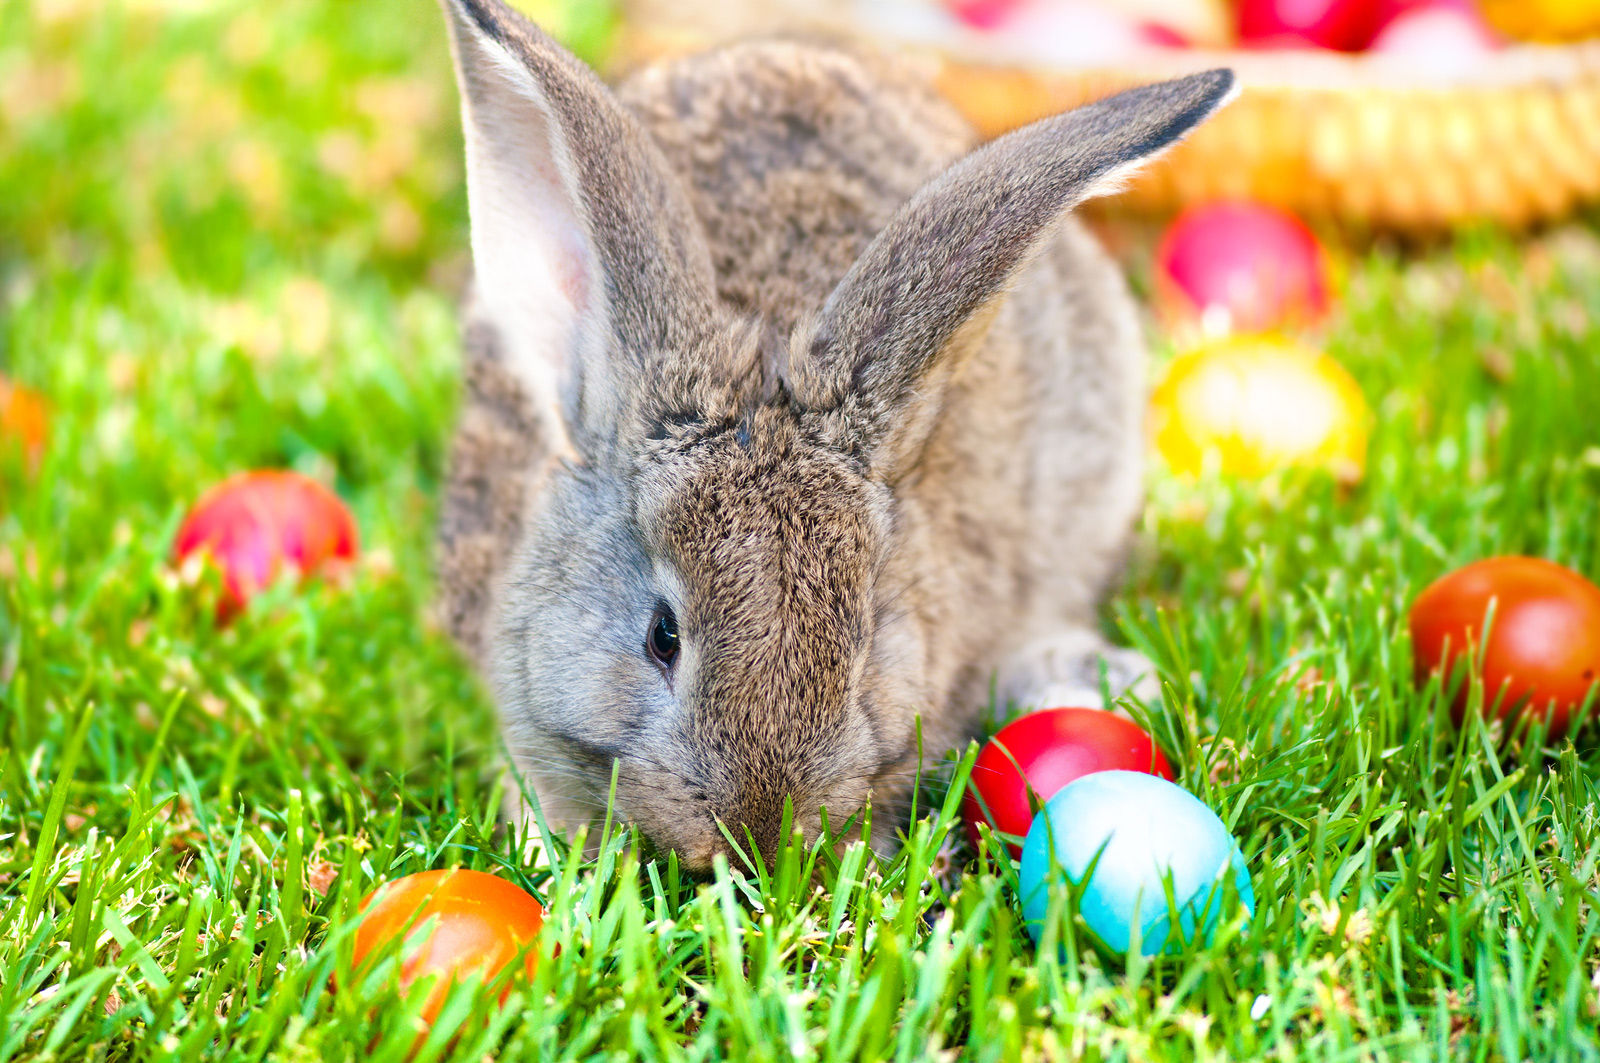 Search for the Easter bunny and enjoy other spring events and activities when staying at Medicine Hat hotels such as the Comfort Inn and Suites.